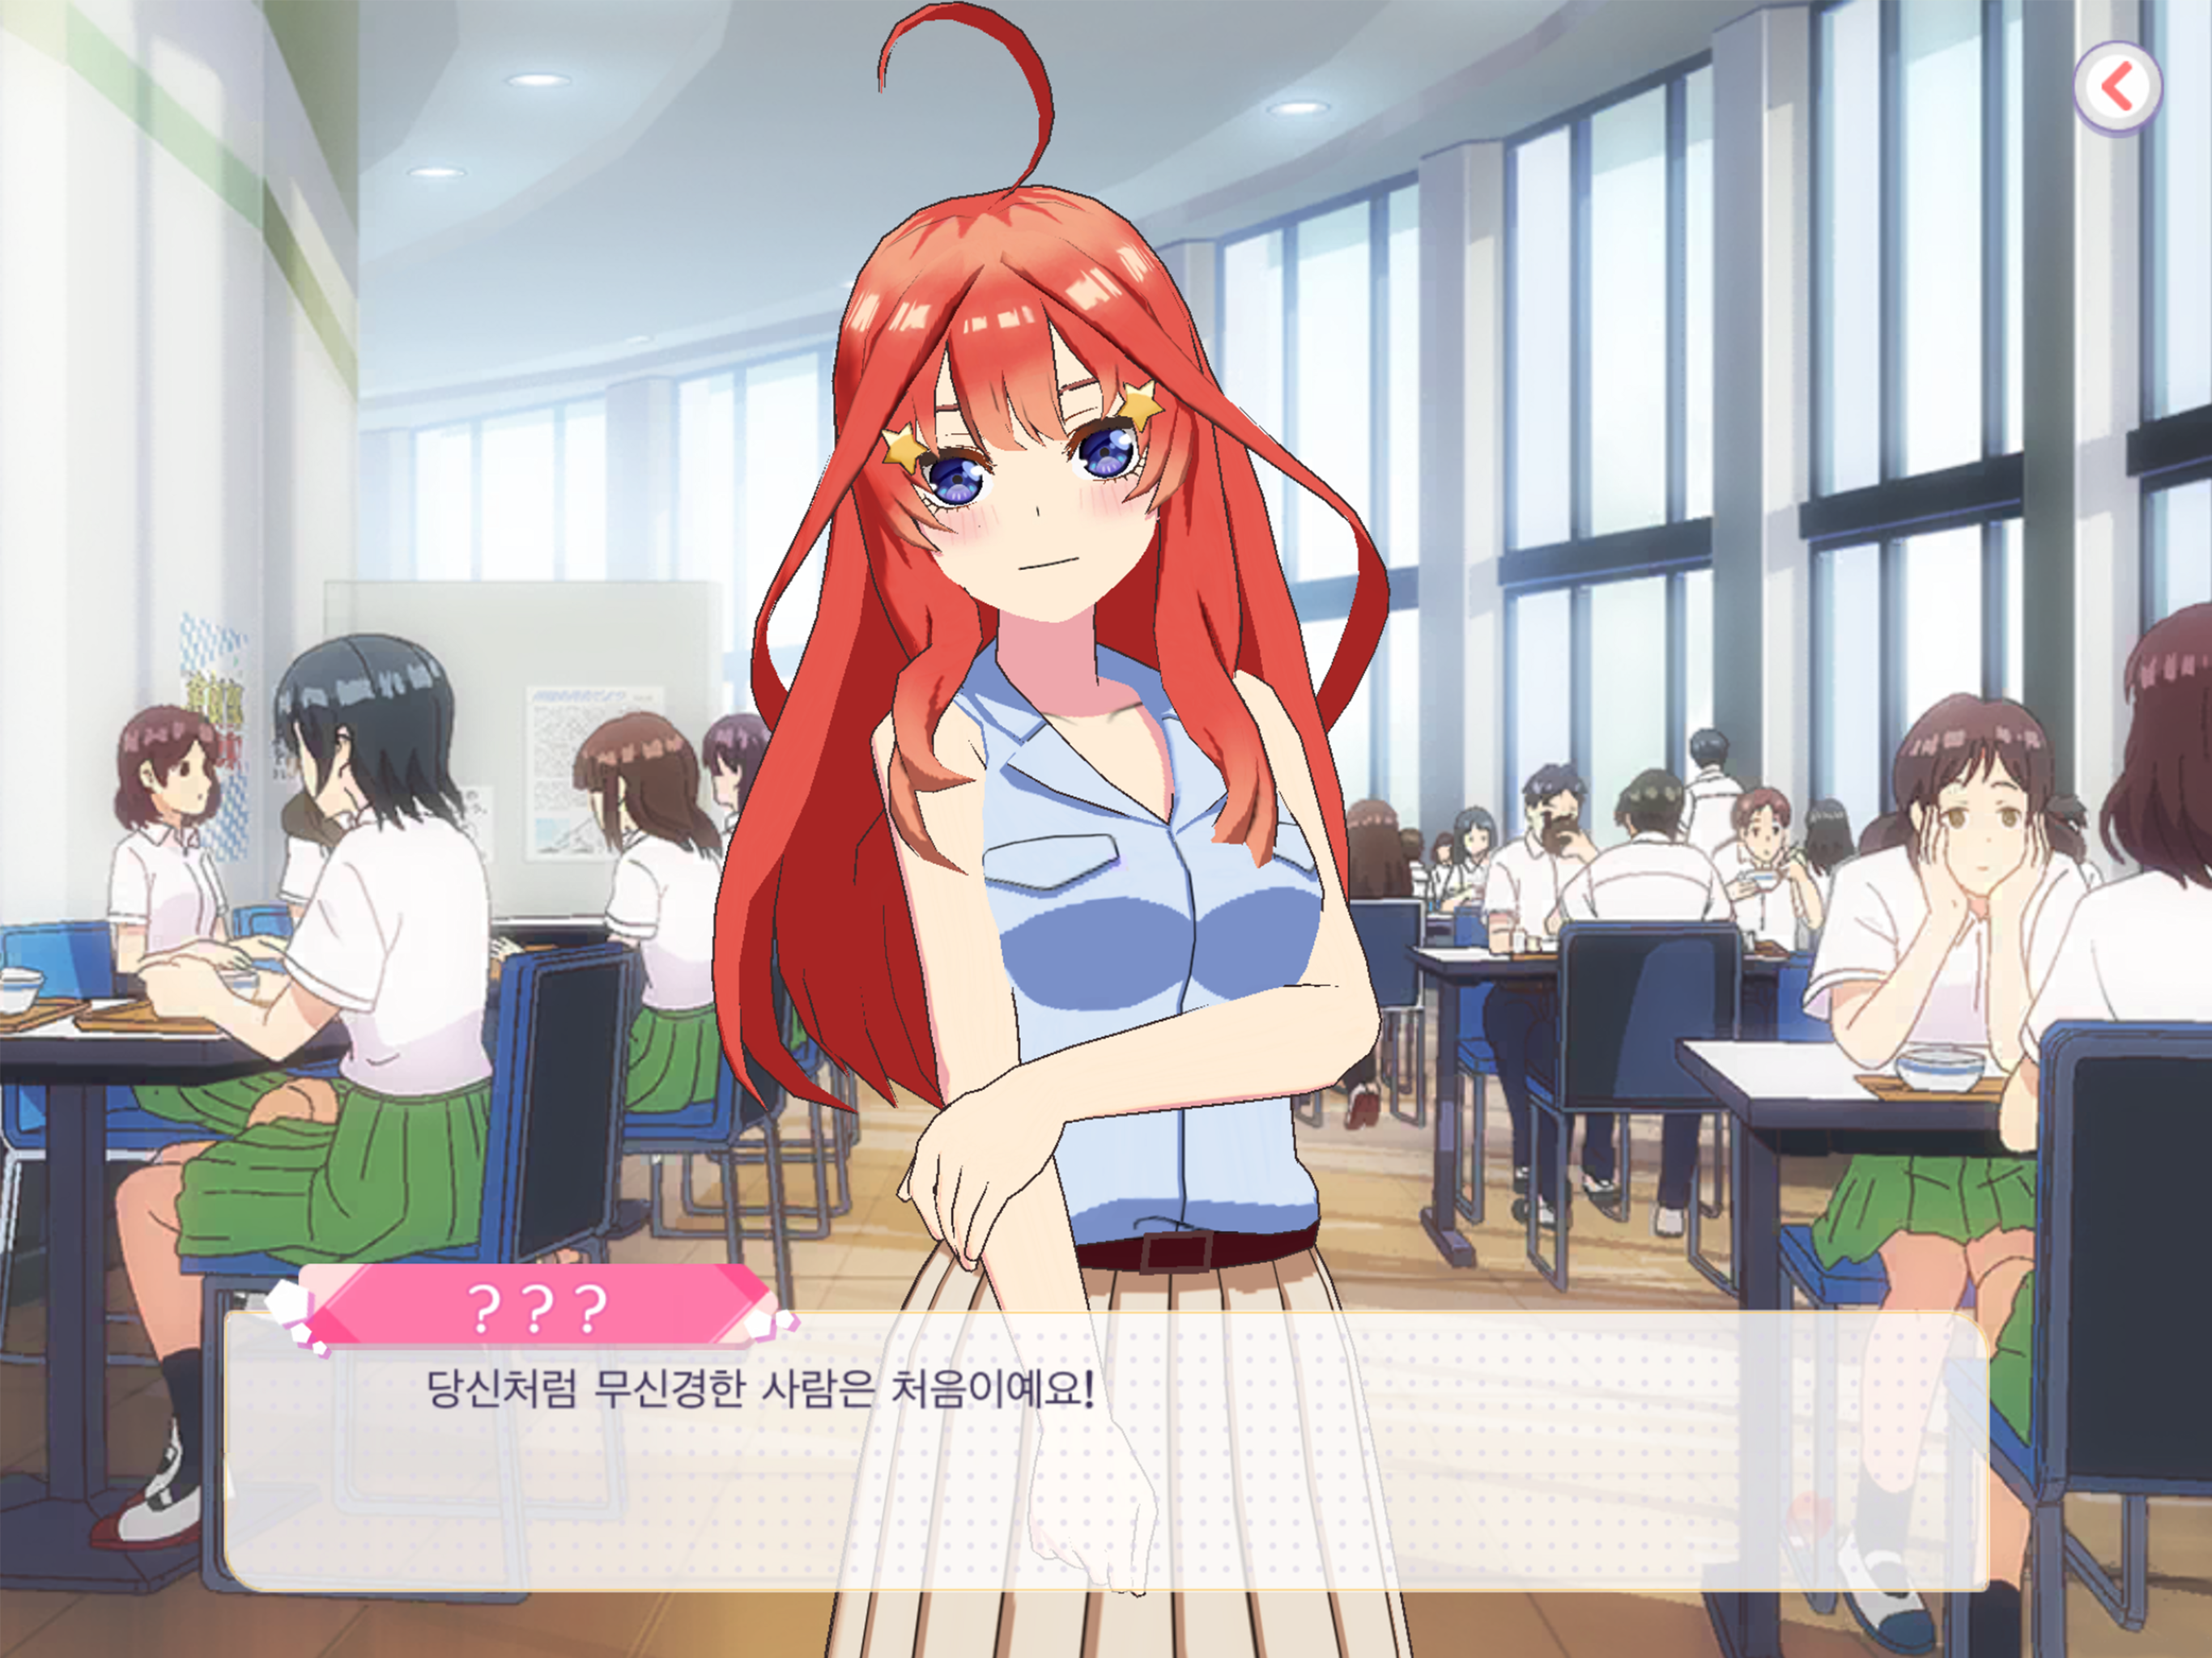 QooApp: Anime Game Platform - Some previews of The Quintessential  Quintuplets season 2 episode 1! Download The Quintessential Quintuplets: The  Quintuplets Can't Divide the Puzzle Into Five Equal Parts